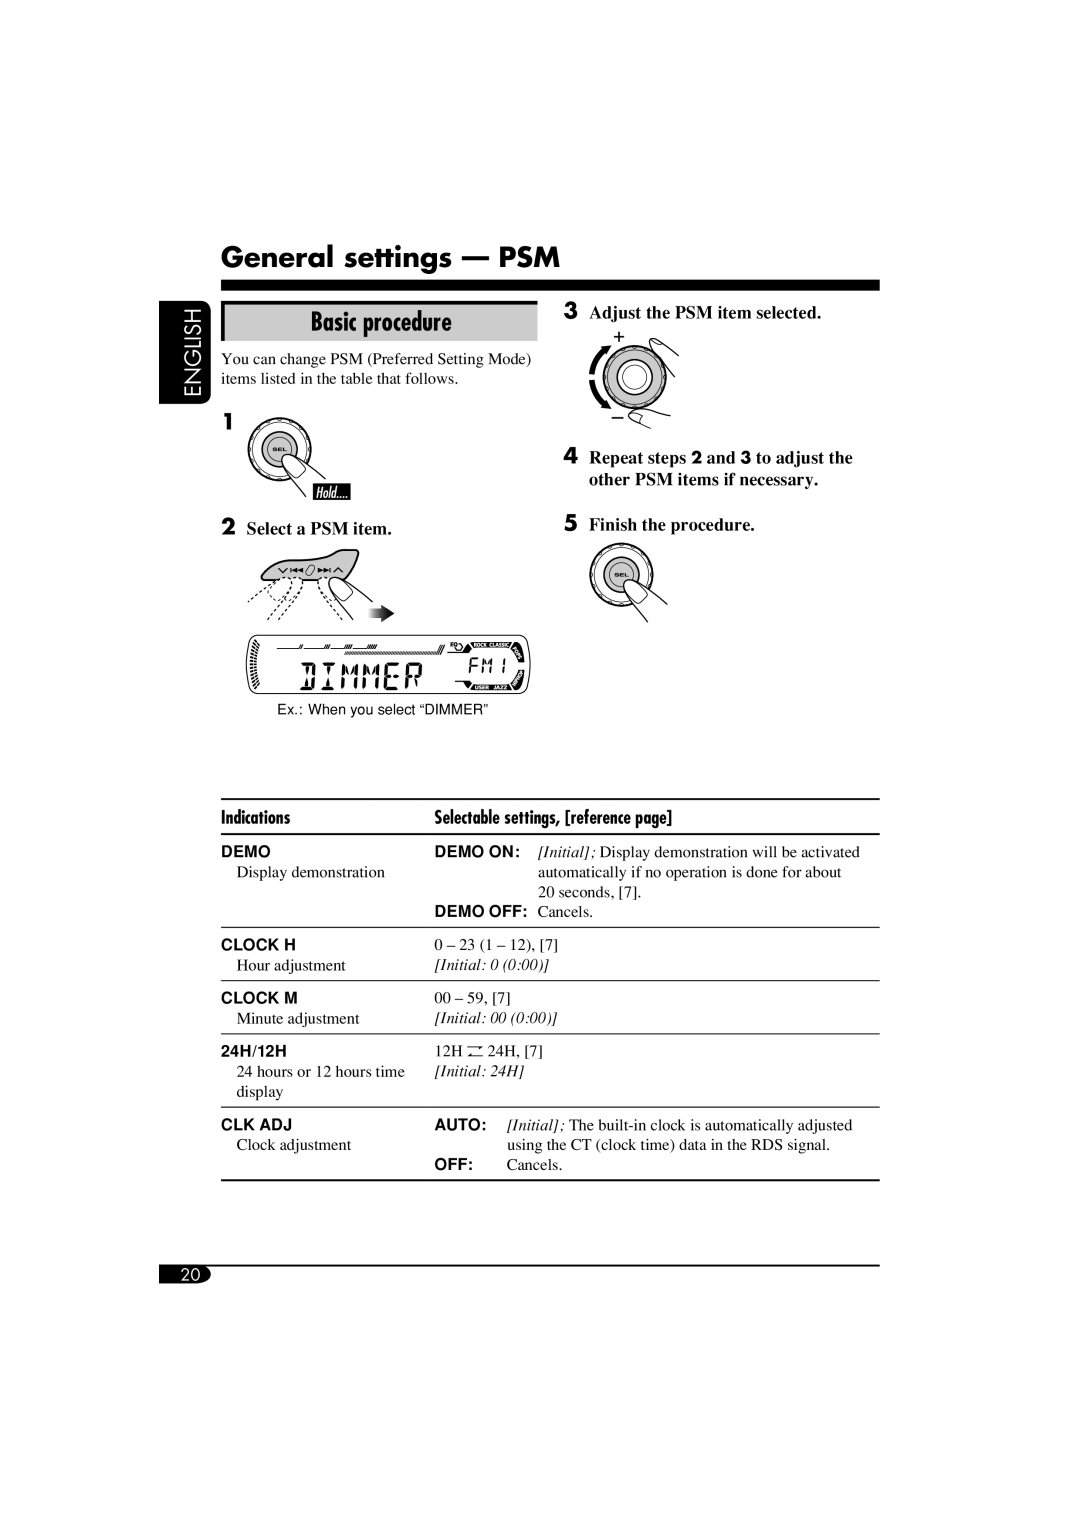 JVC KD-G411 General settings - PSM, Basic procedure, English, Adjust the PSM item selected, Select a PSM item, Indications 